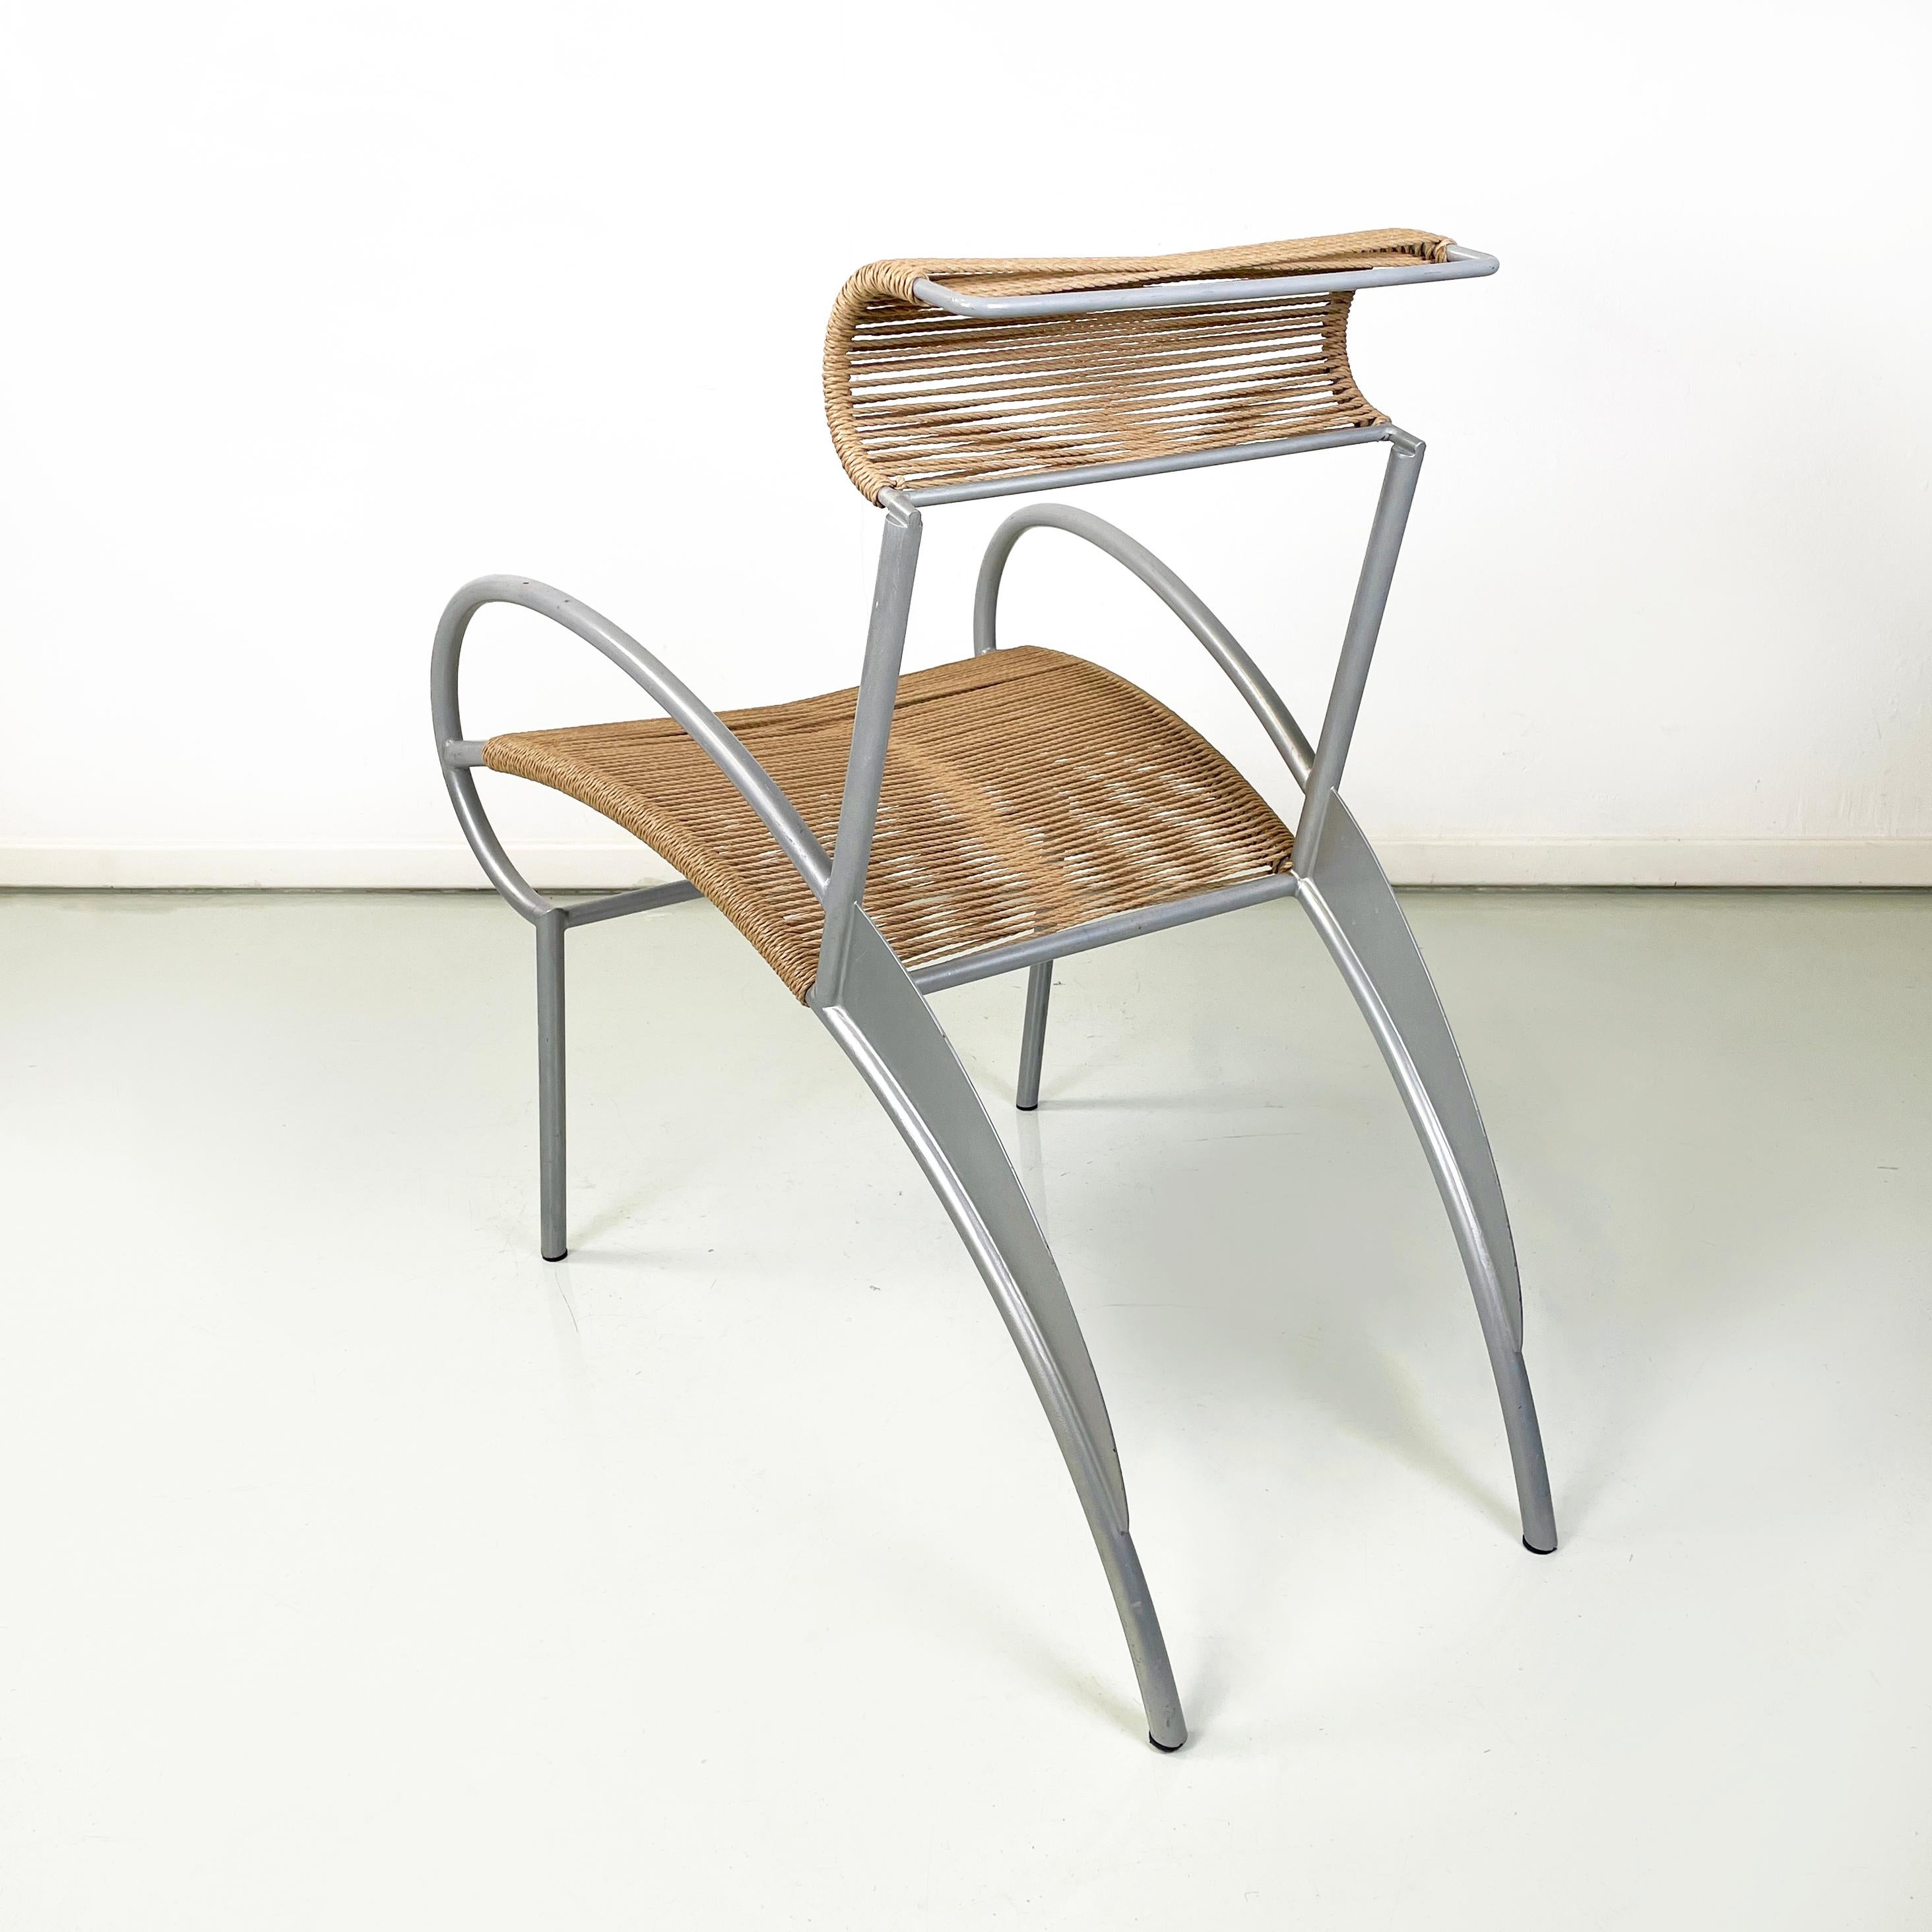 Modern Italian modern rope and gray steel chair Juliette by Massimo Iosa-Ghini, 1990s For Sale